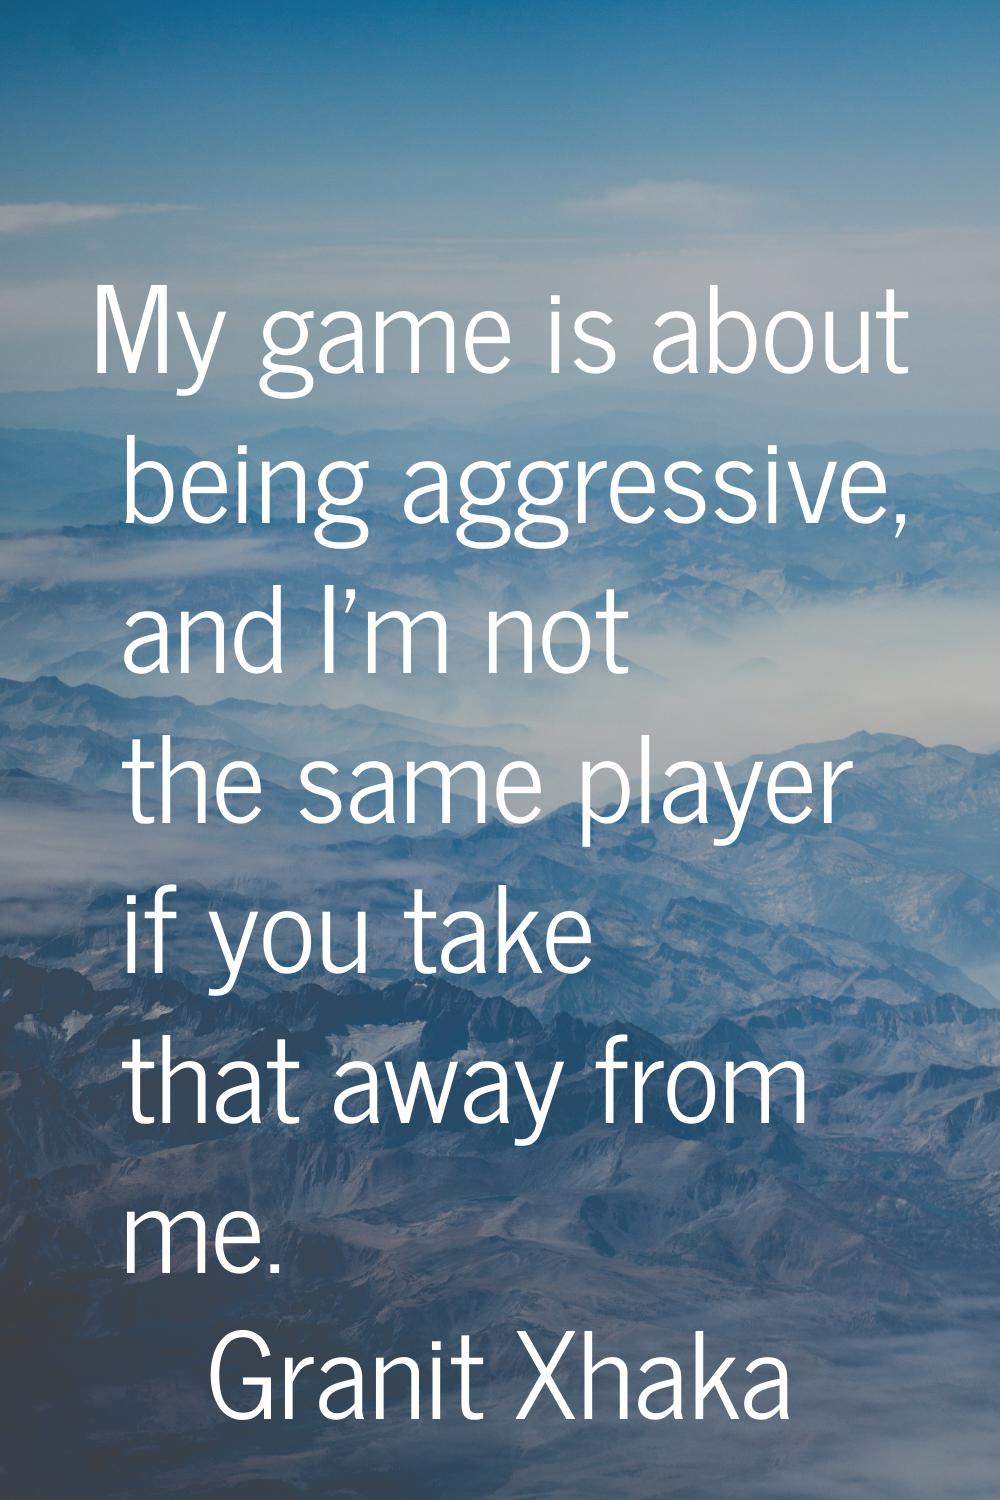 My game is about being aggressive, and I'm not the same player if you take that away from me.